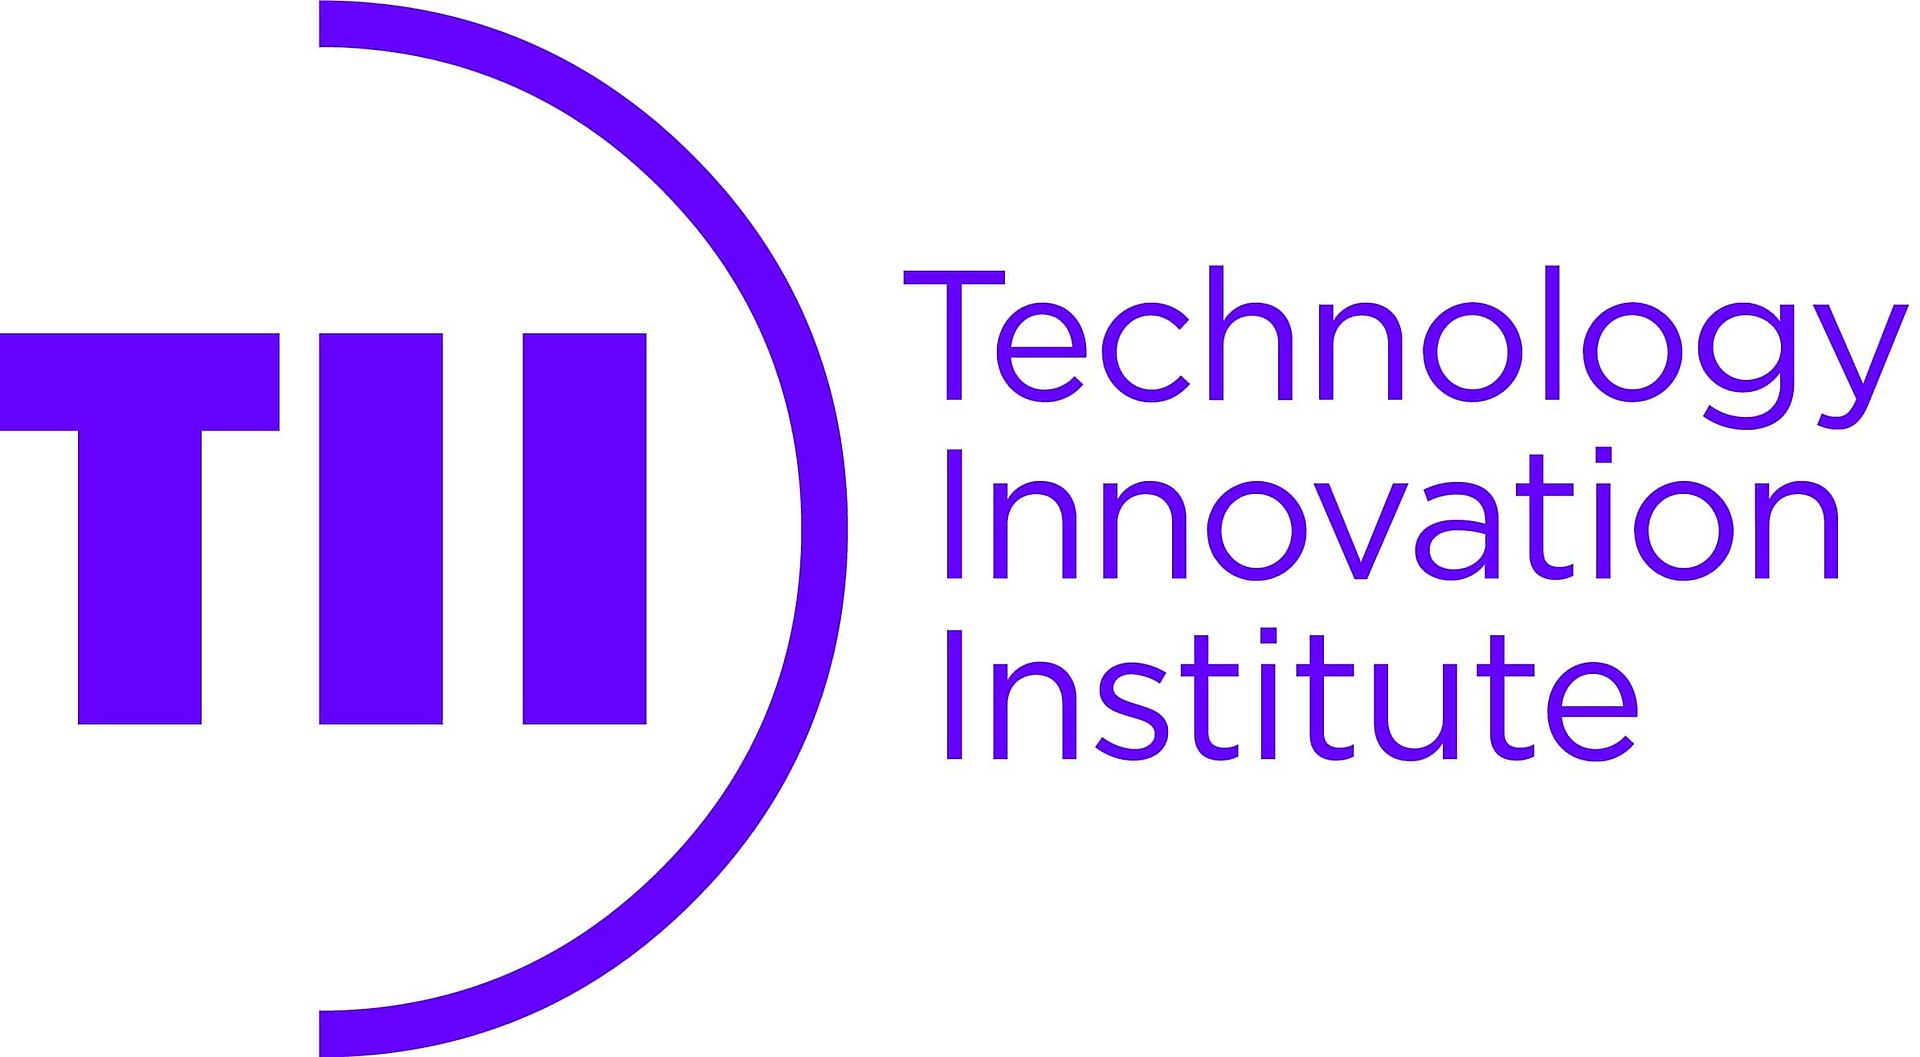 The Technology Innovation Institute (TII)